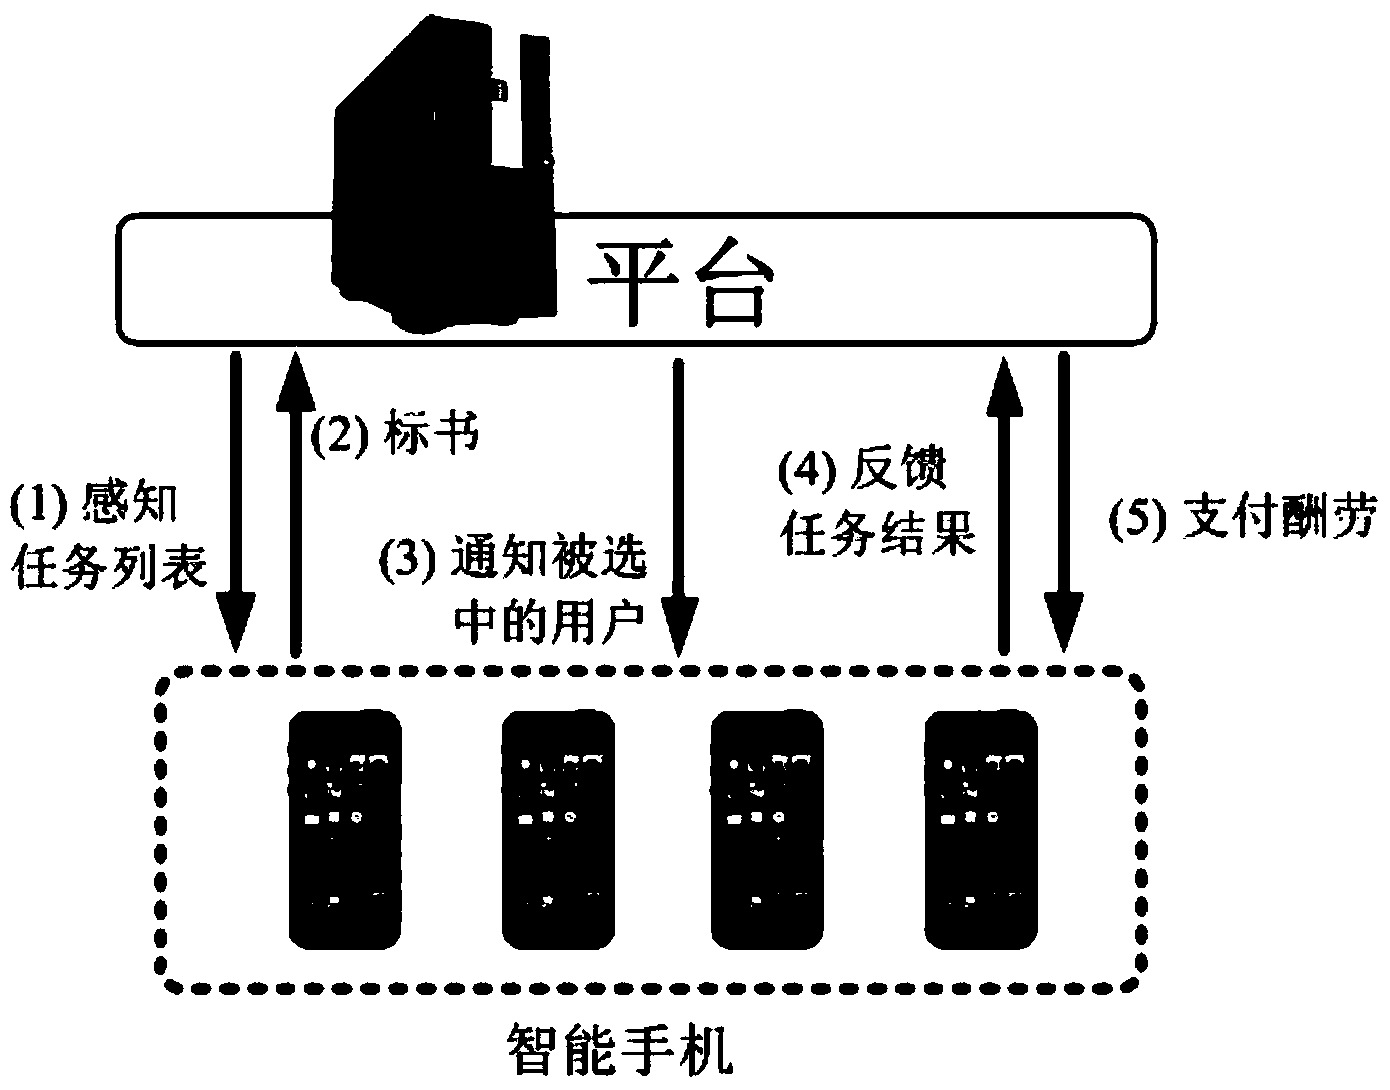 Method and system for preventing fraudulent auction in group intelligent perception system